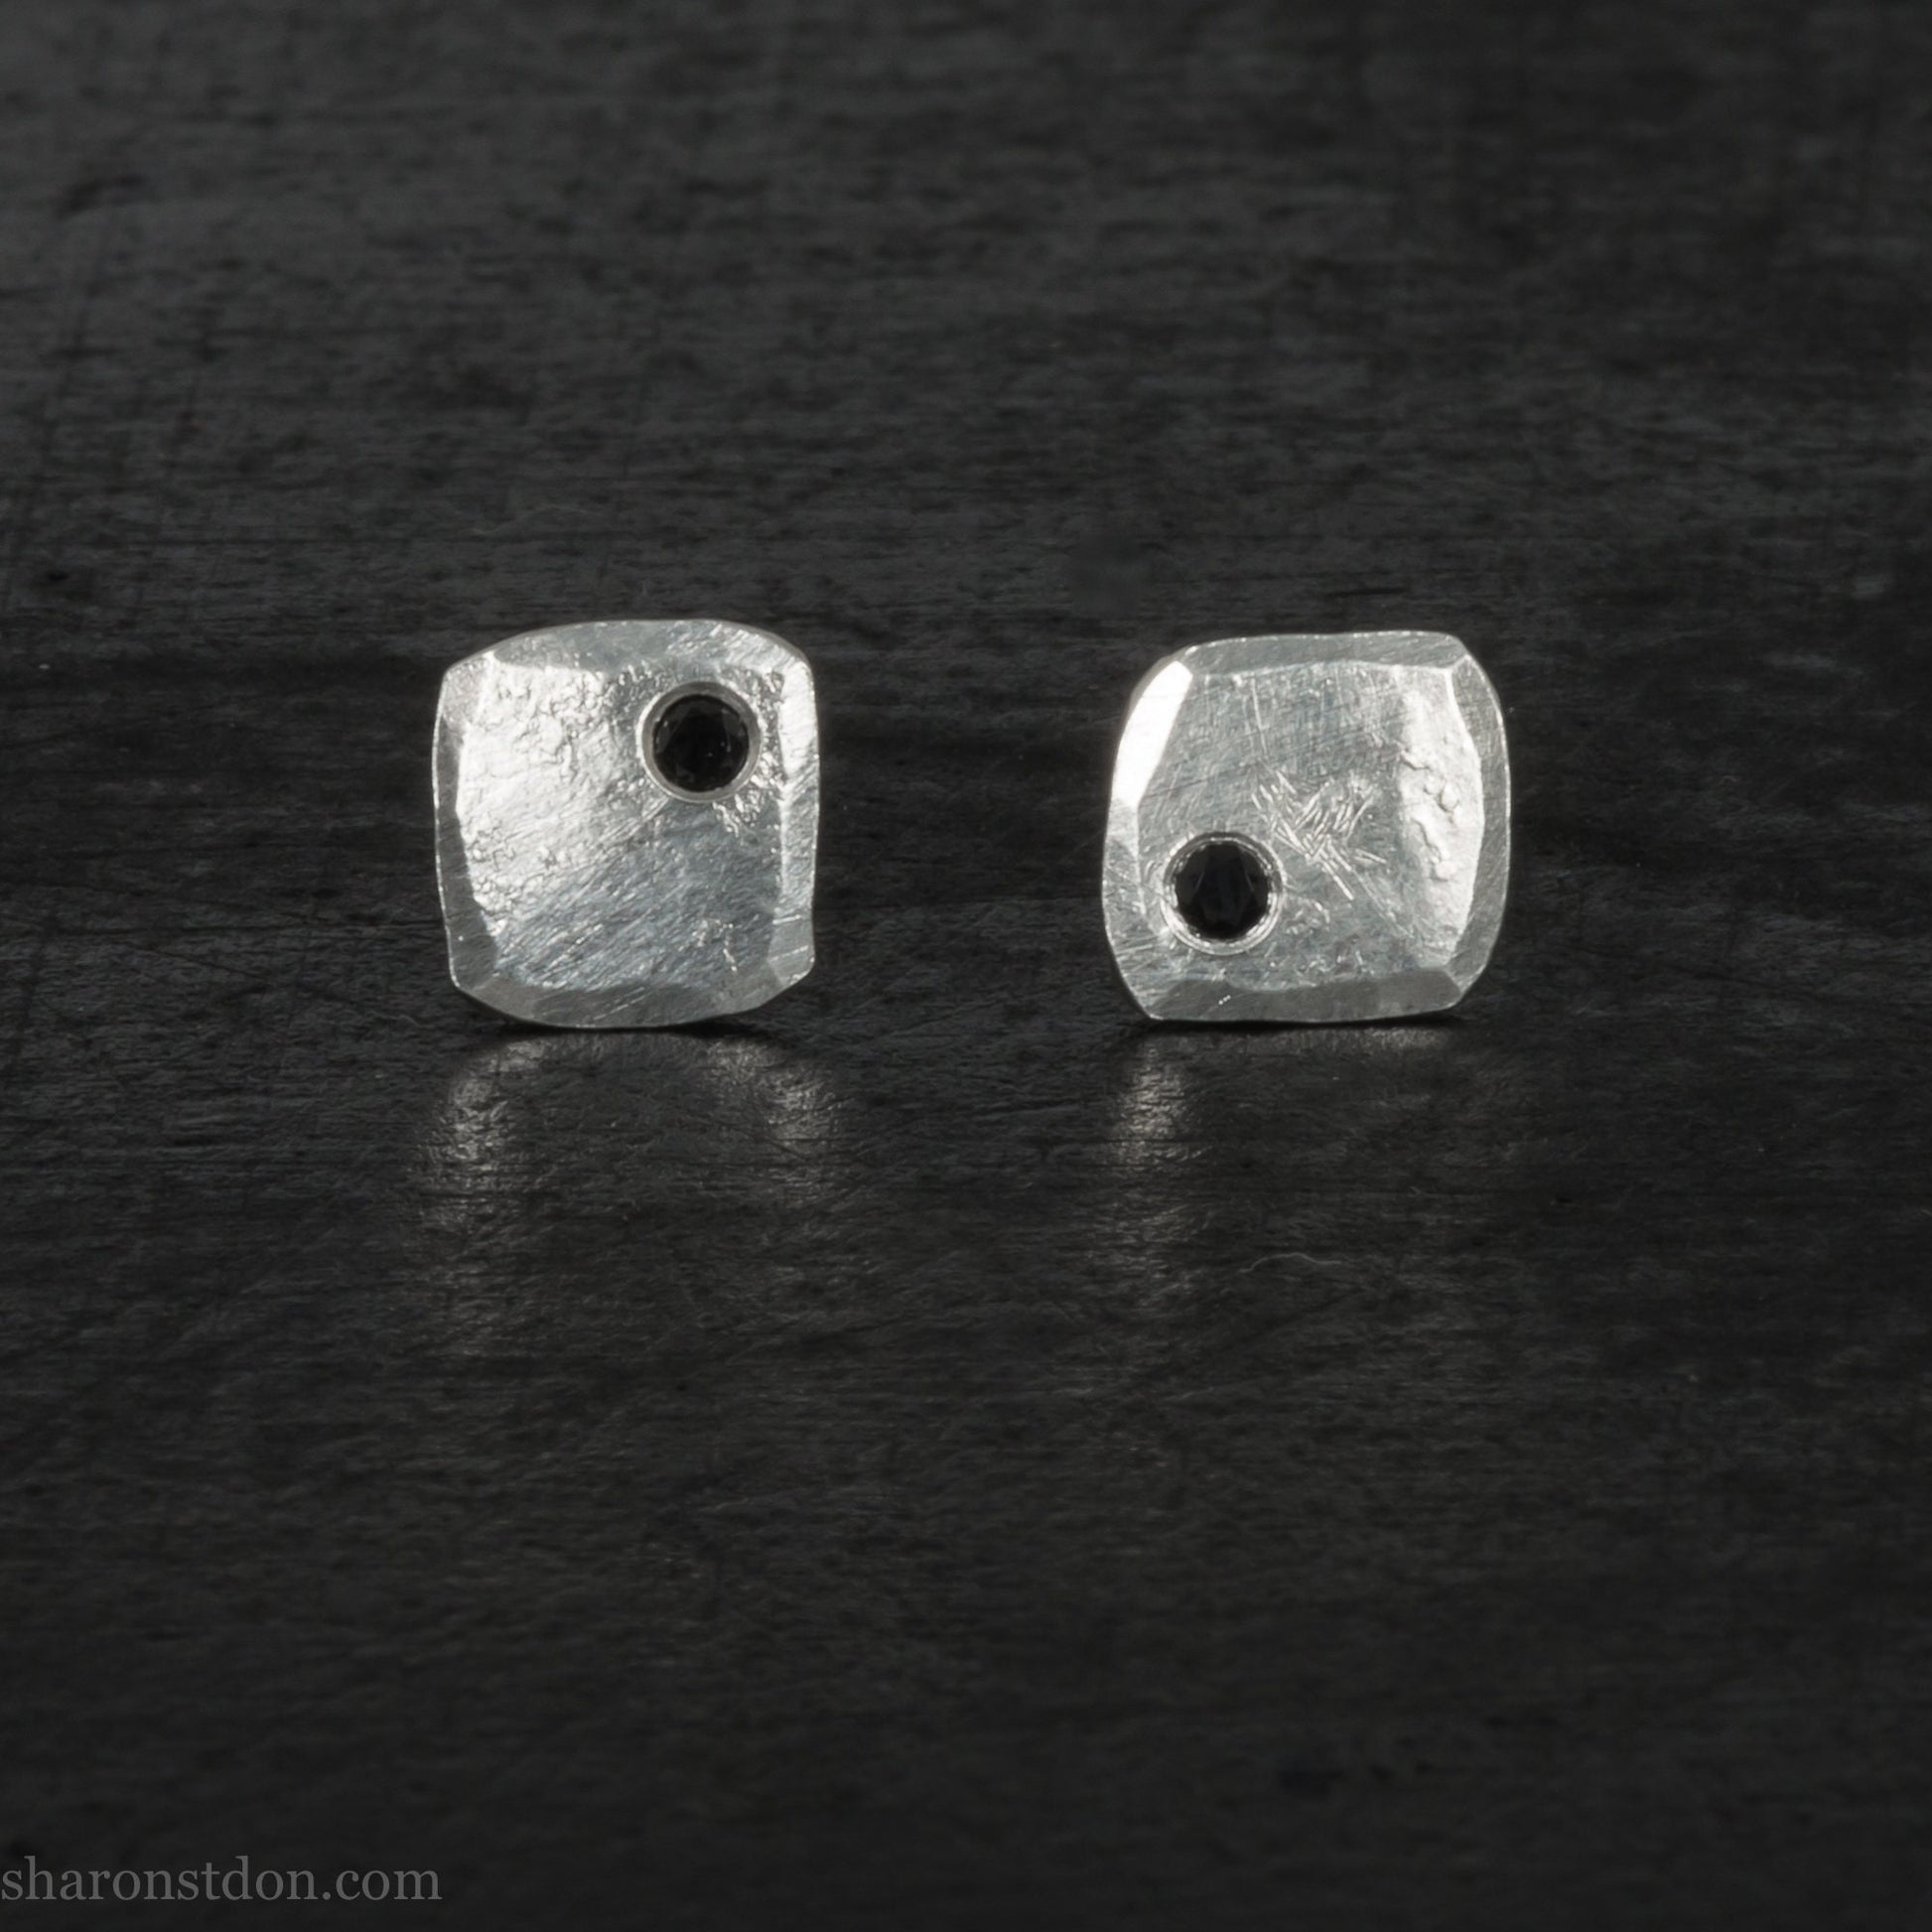 7mm square 925 sterling silver stud earrings with a black spinel gemstone in the corner. Hammered texture with a matte, brushed, shiny finish. Handmade by Sharon SaintDon in North America for men or women.